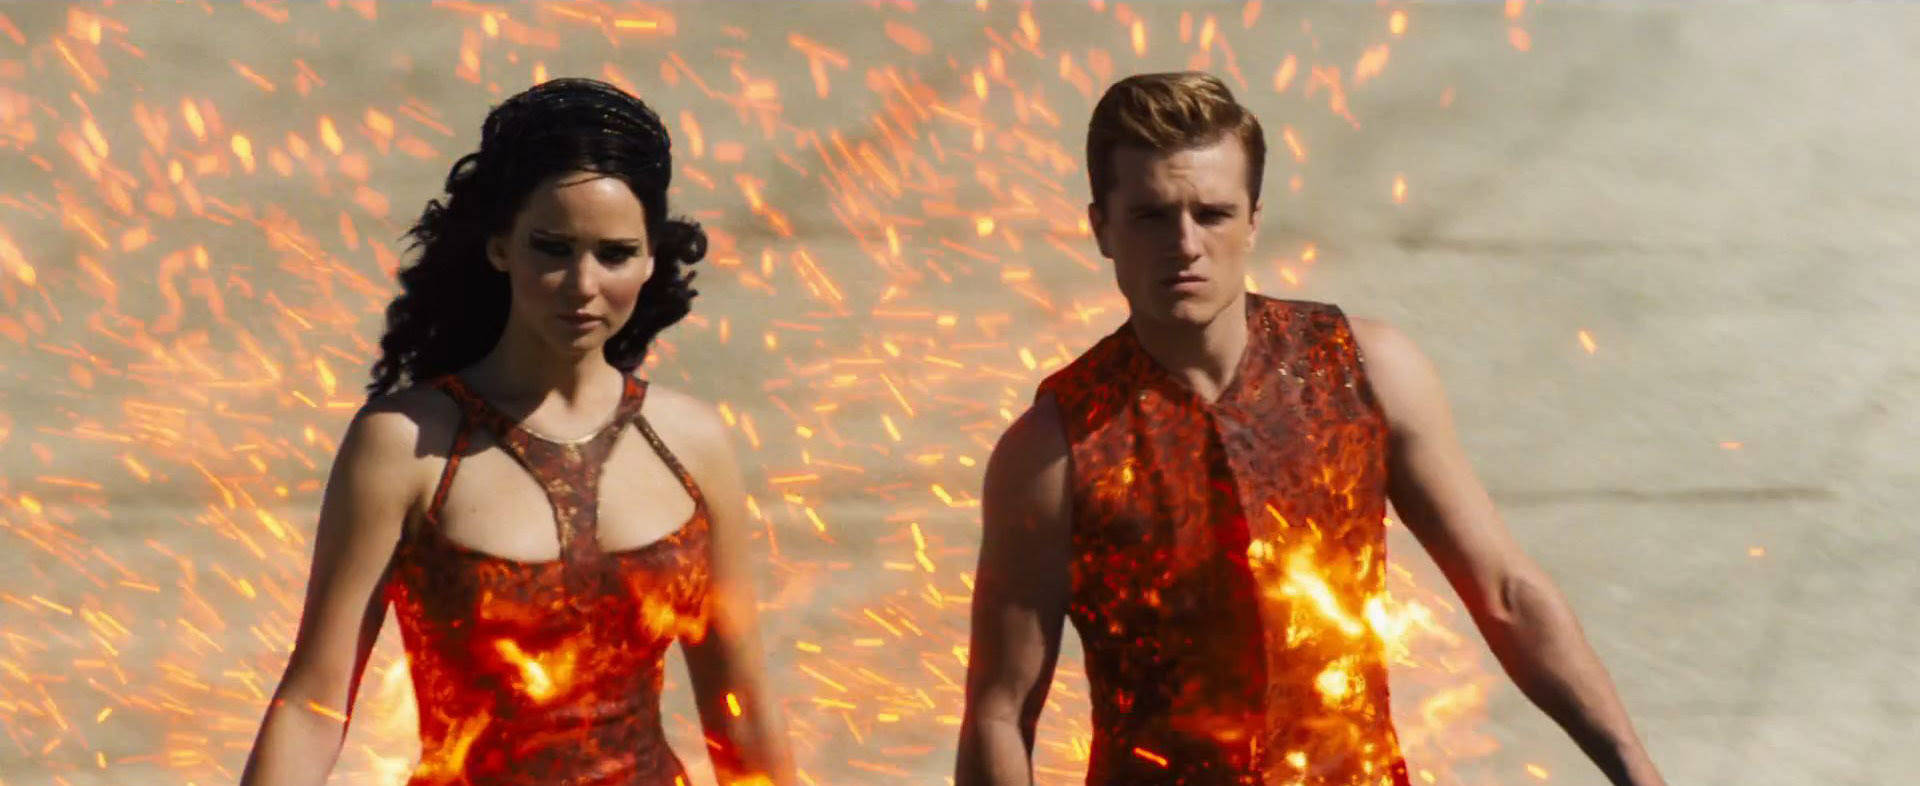 The Hunger Games Flaming Outfit Background